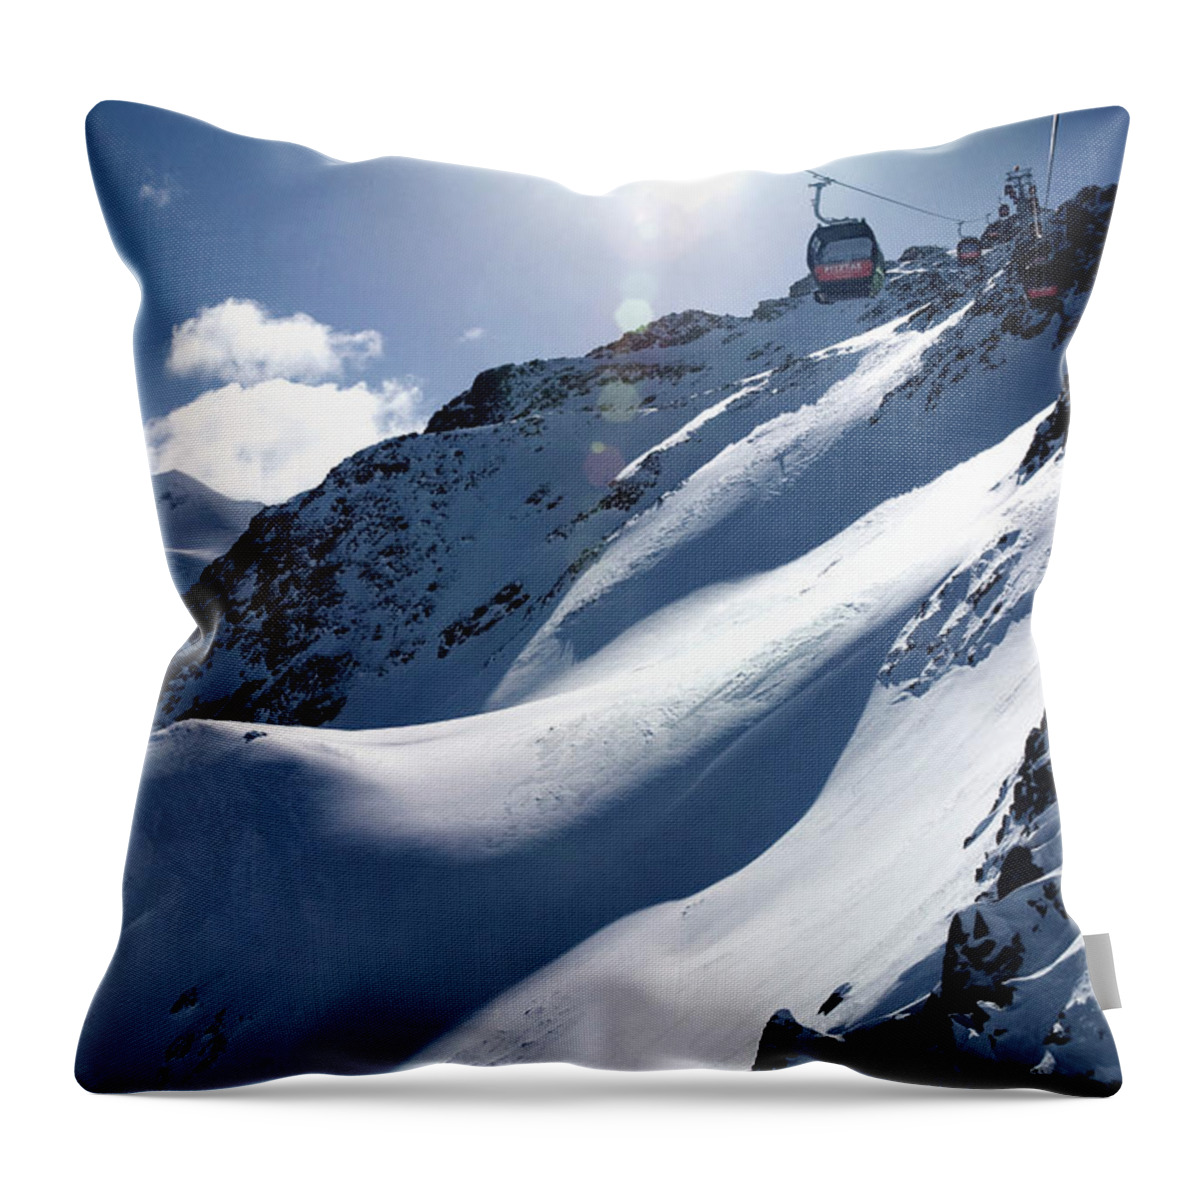 Estock Throw Pillow featuring the digital art Gondola Over Snow Covered Mountains by Sandra Raccanello